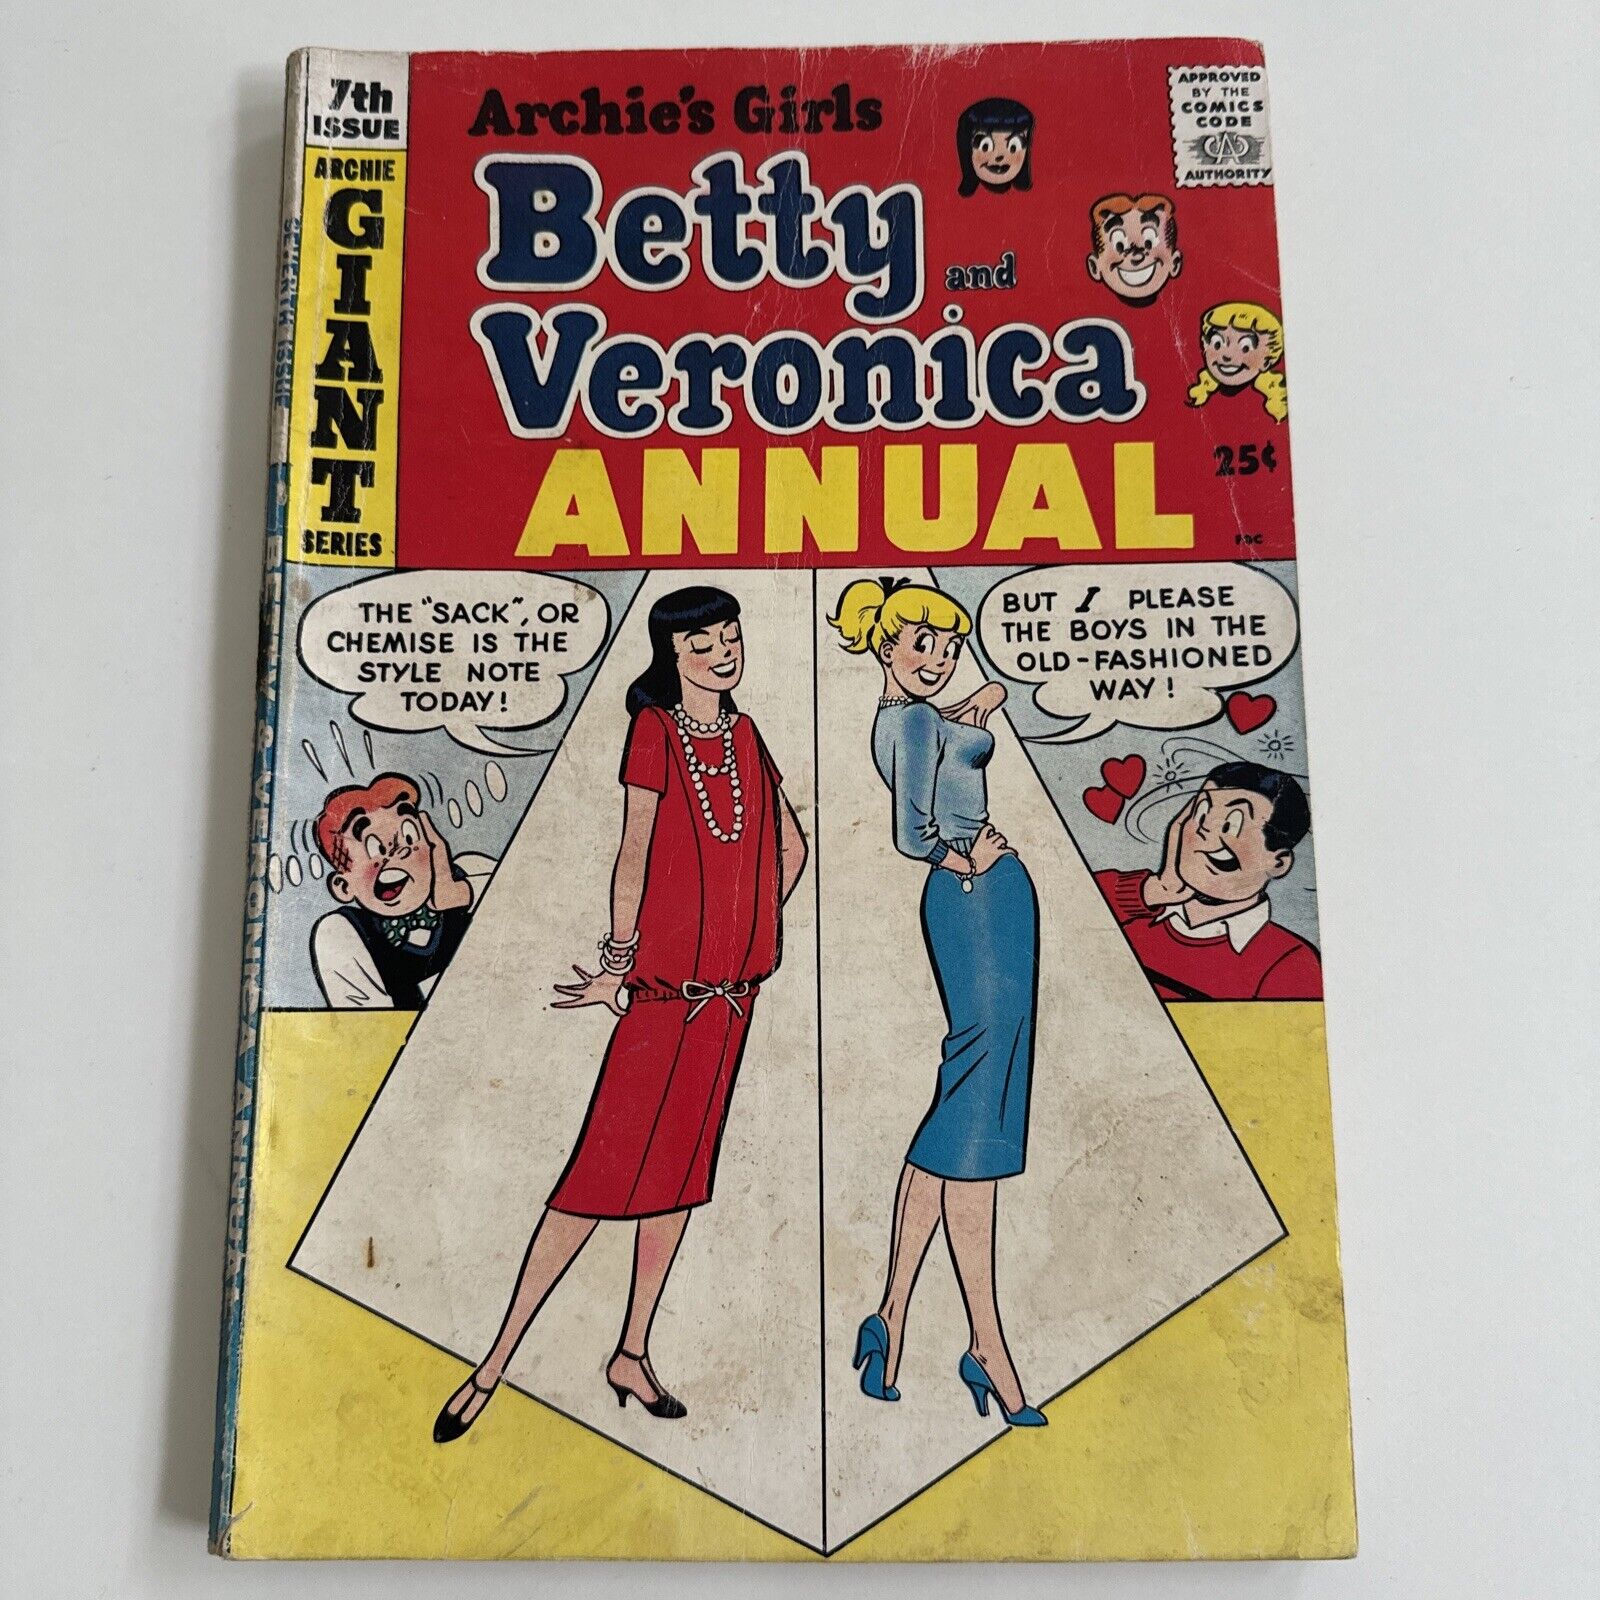 ARCHIE’S GIRLS BETTY & VERONICA ANNUAL # 7 | Giant Size  Silver Age 1957 | VG